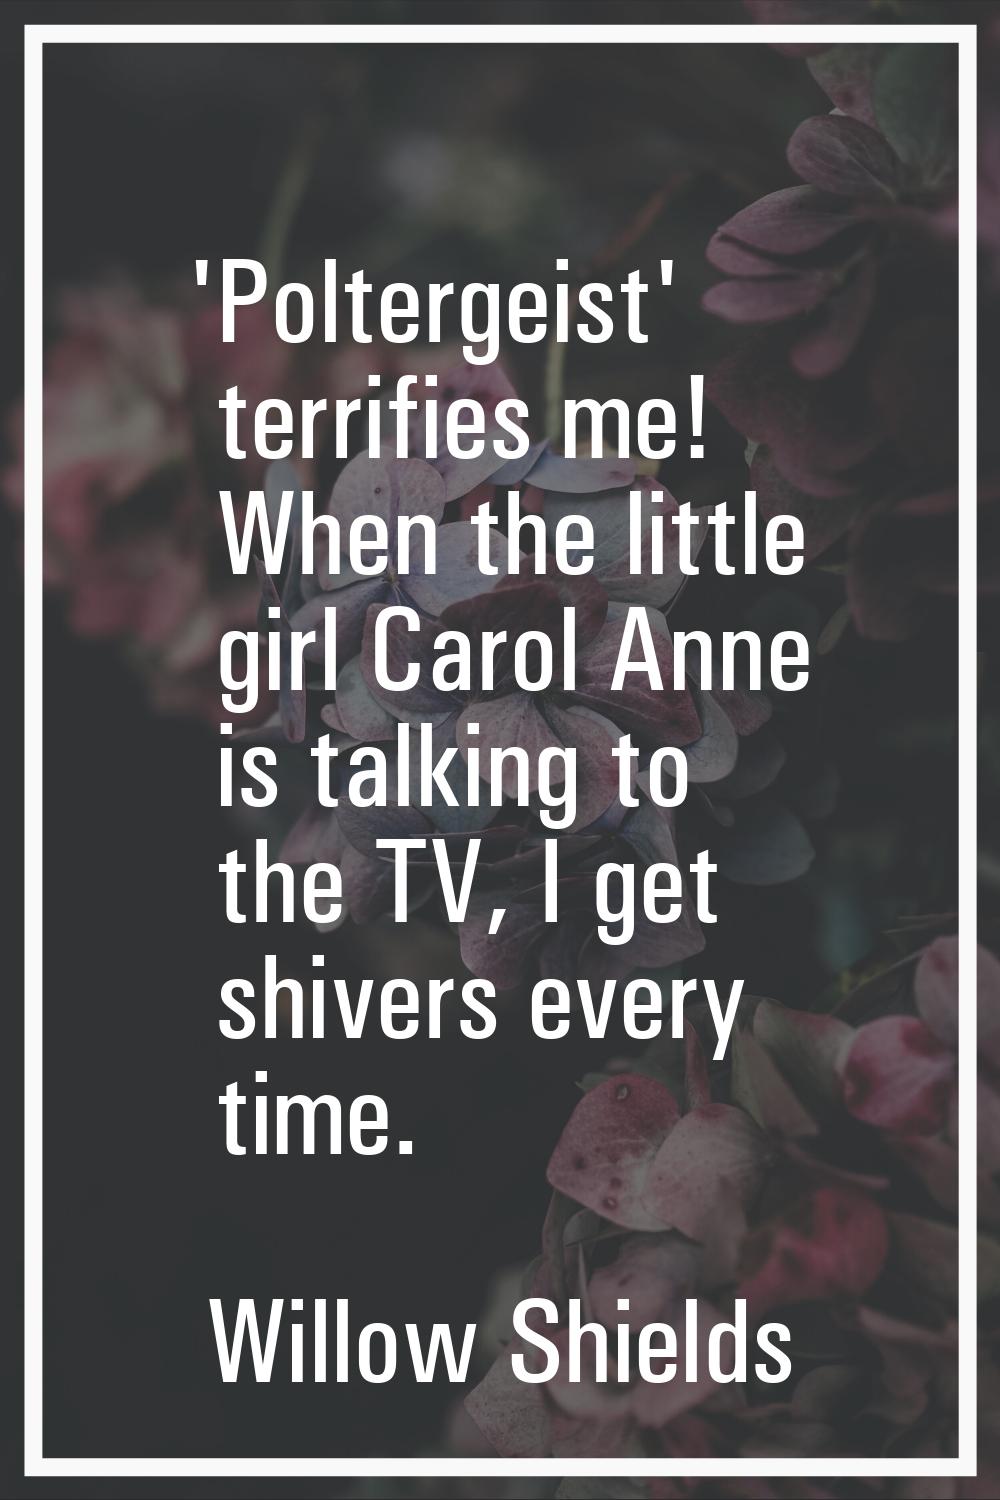 'Poltergeist' terrifies me! When the little girl Carol Anne is talking to the TV, I get shivers eve